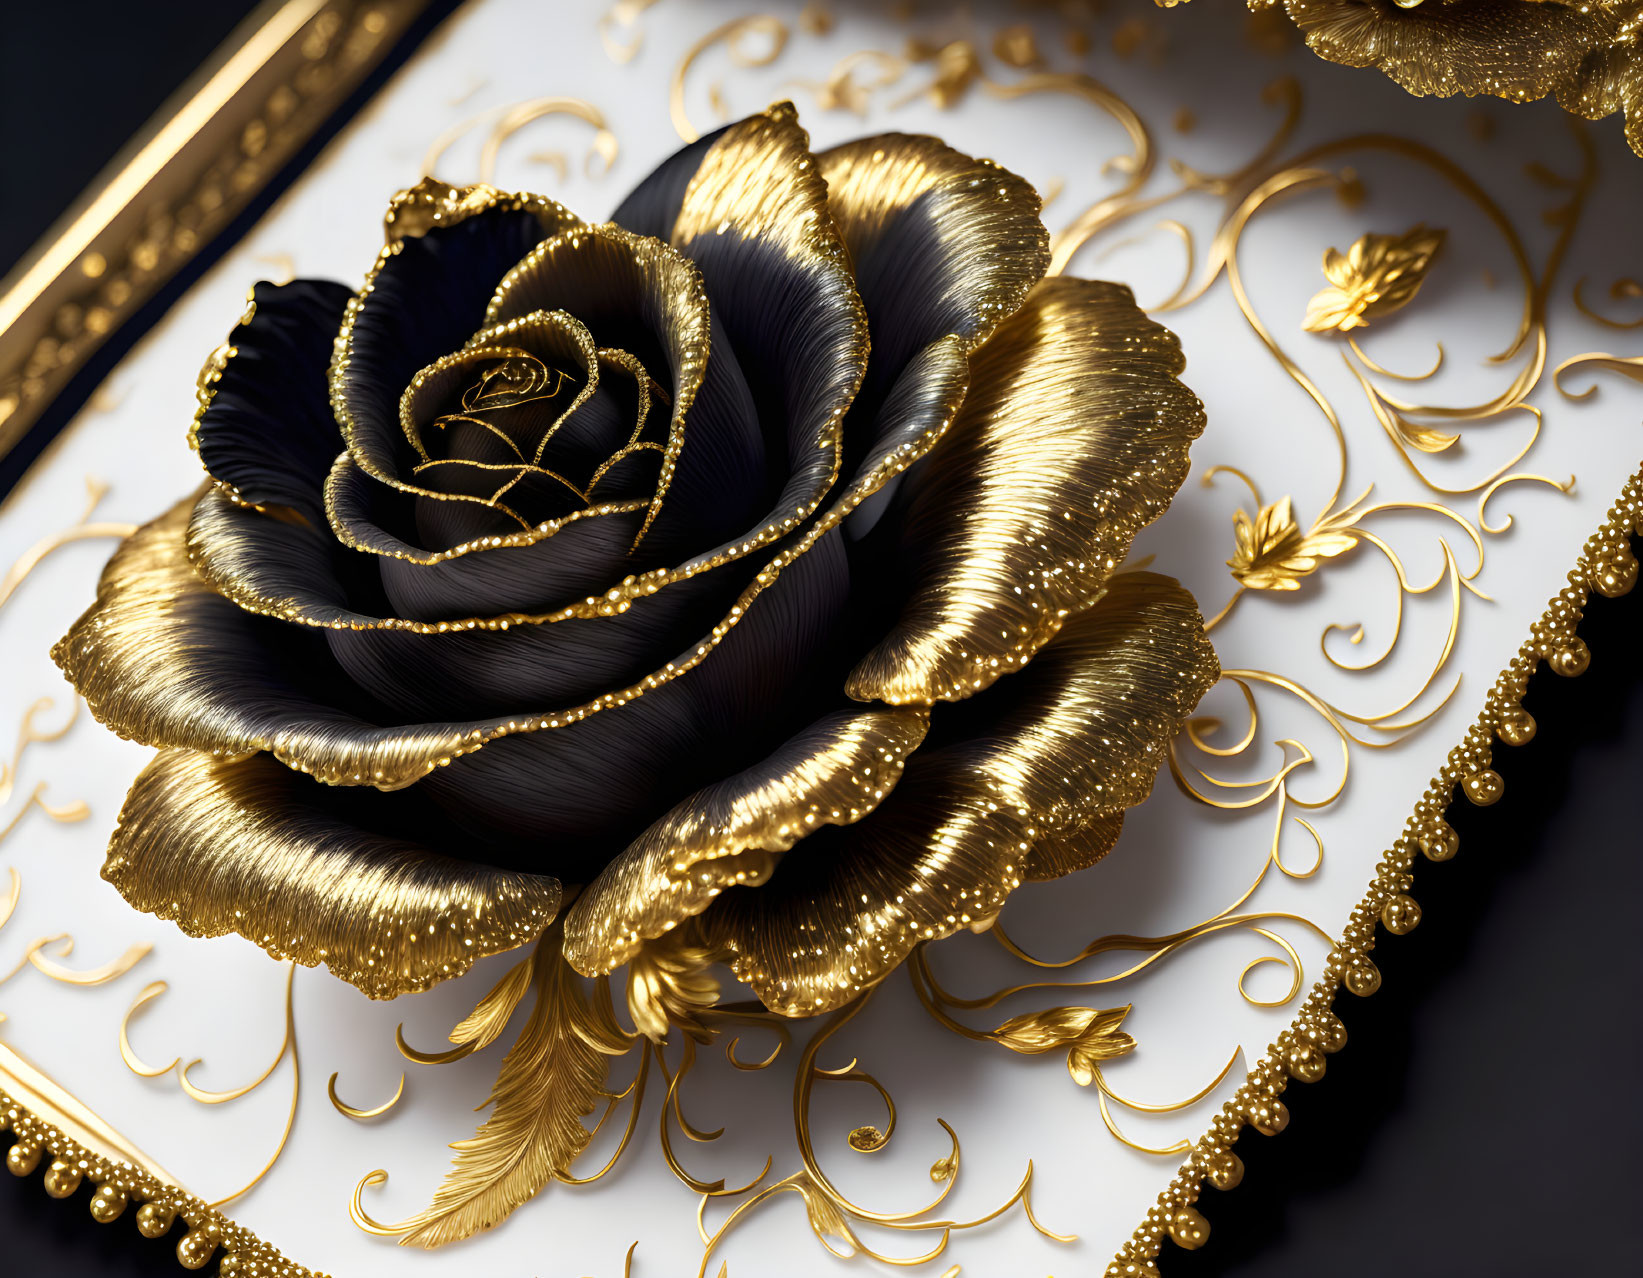 Black Rose Embroidered in Gold #002